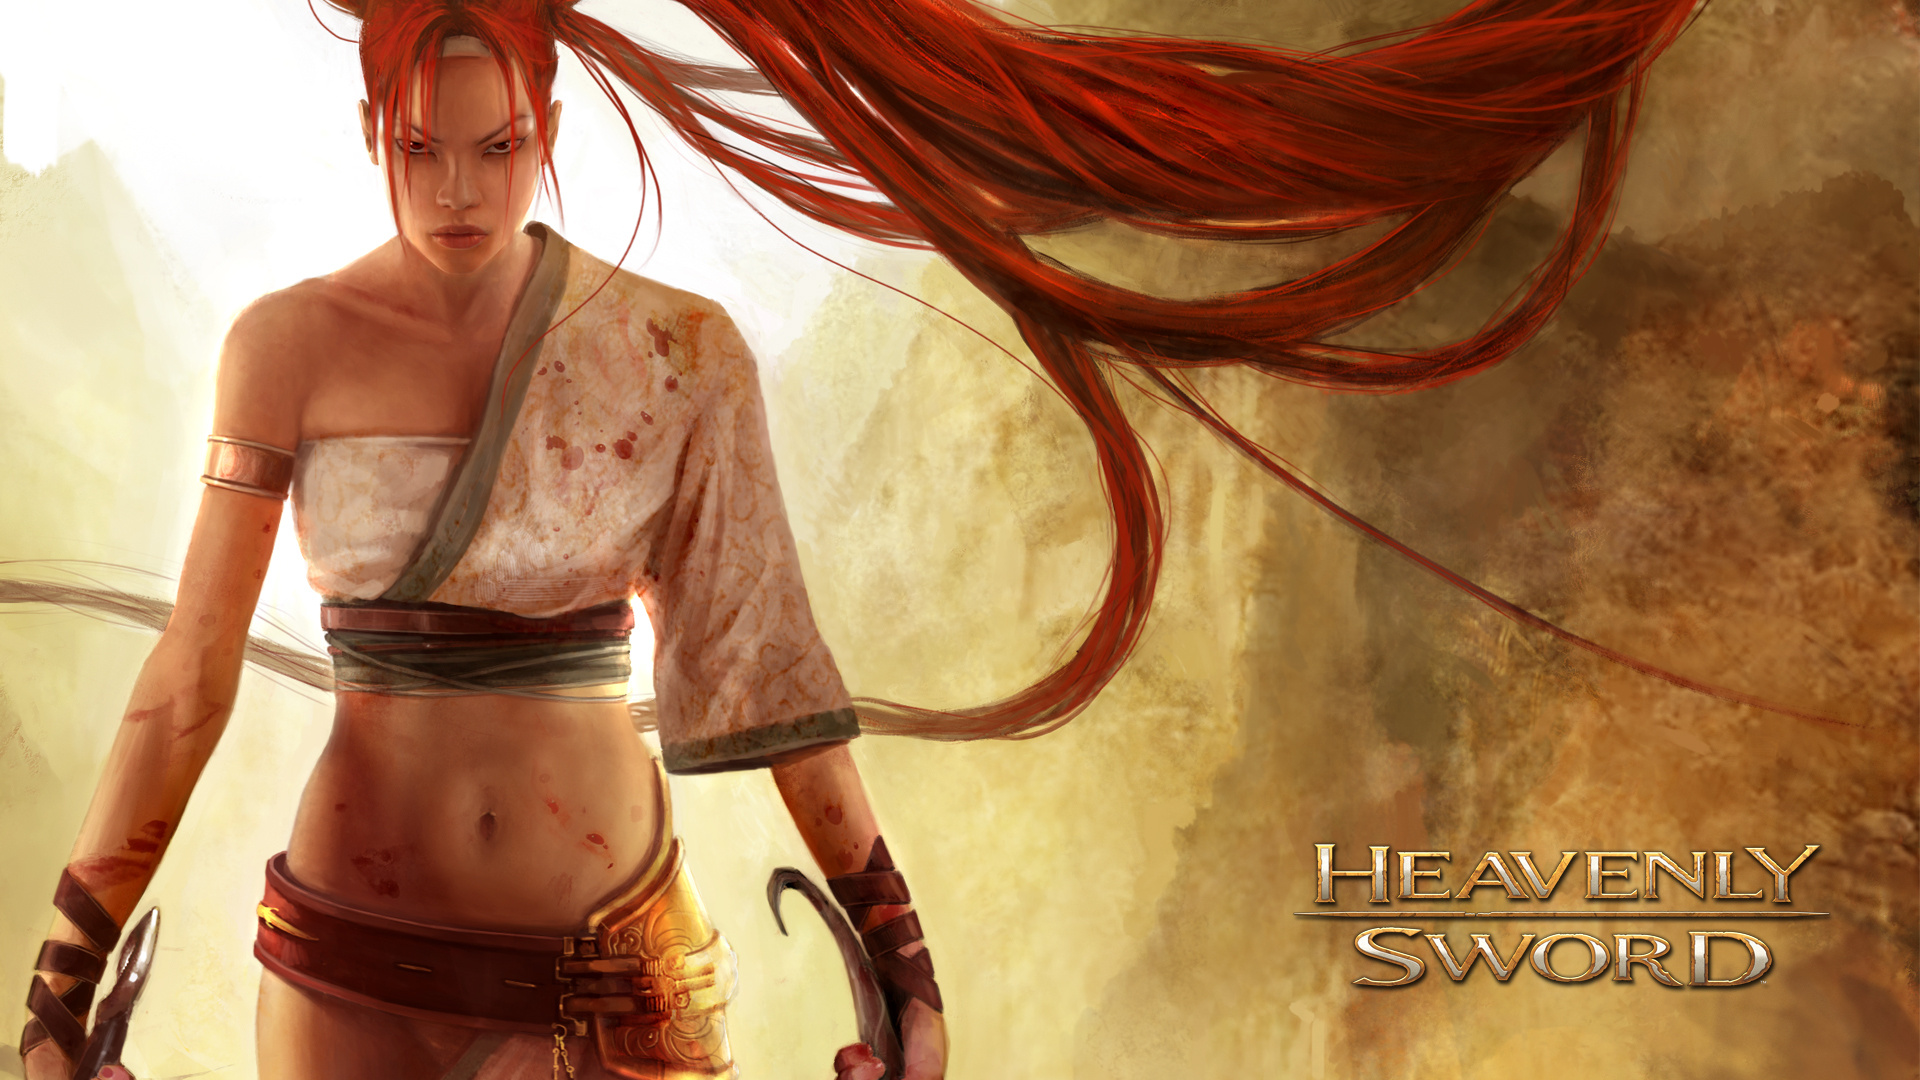 20+ Heavenly Sword HD Wallpapers and Backgrounds 1920x1080